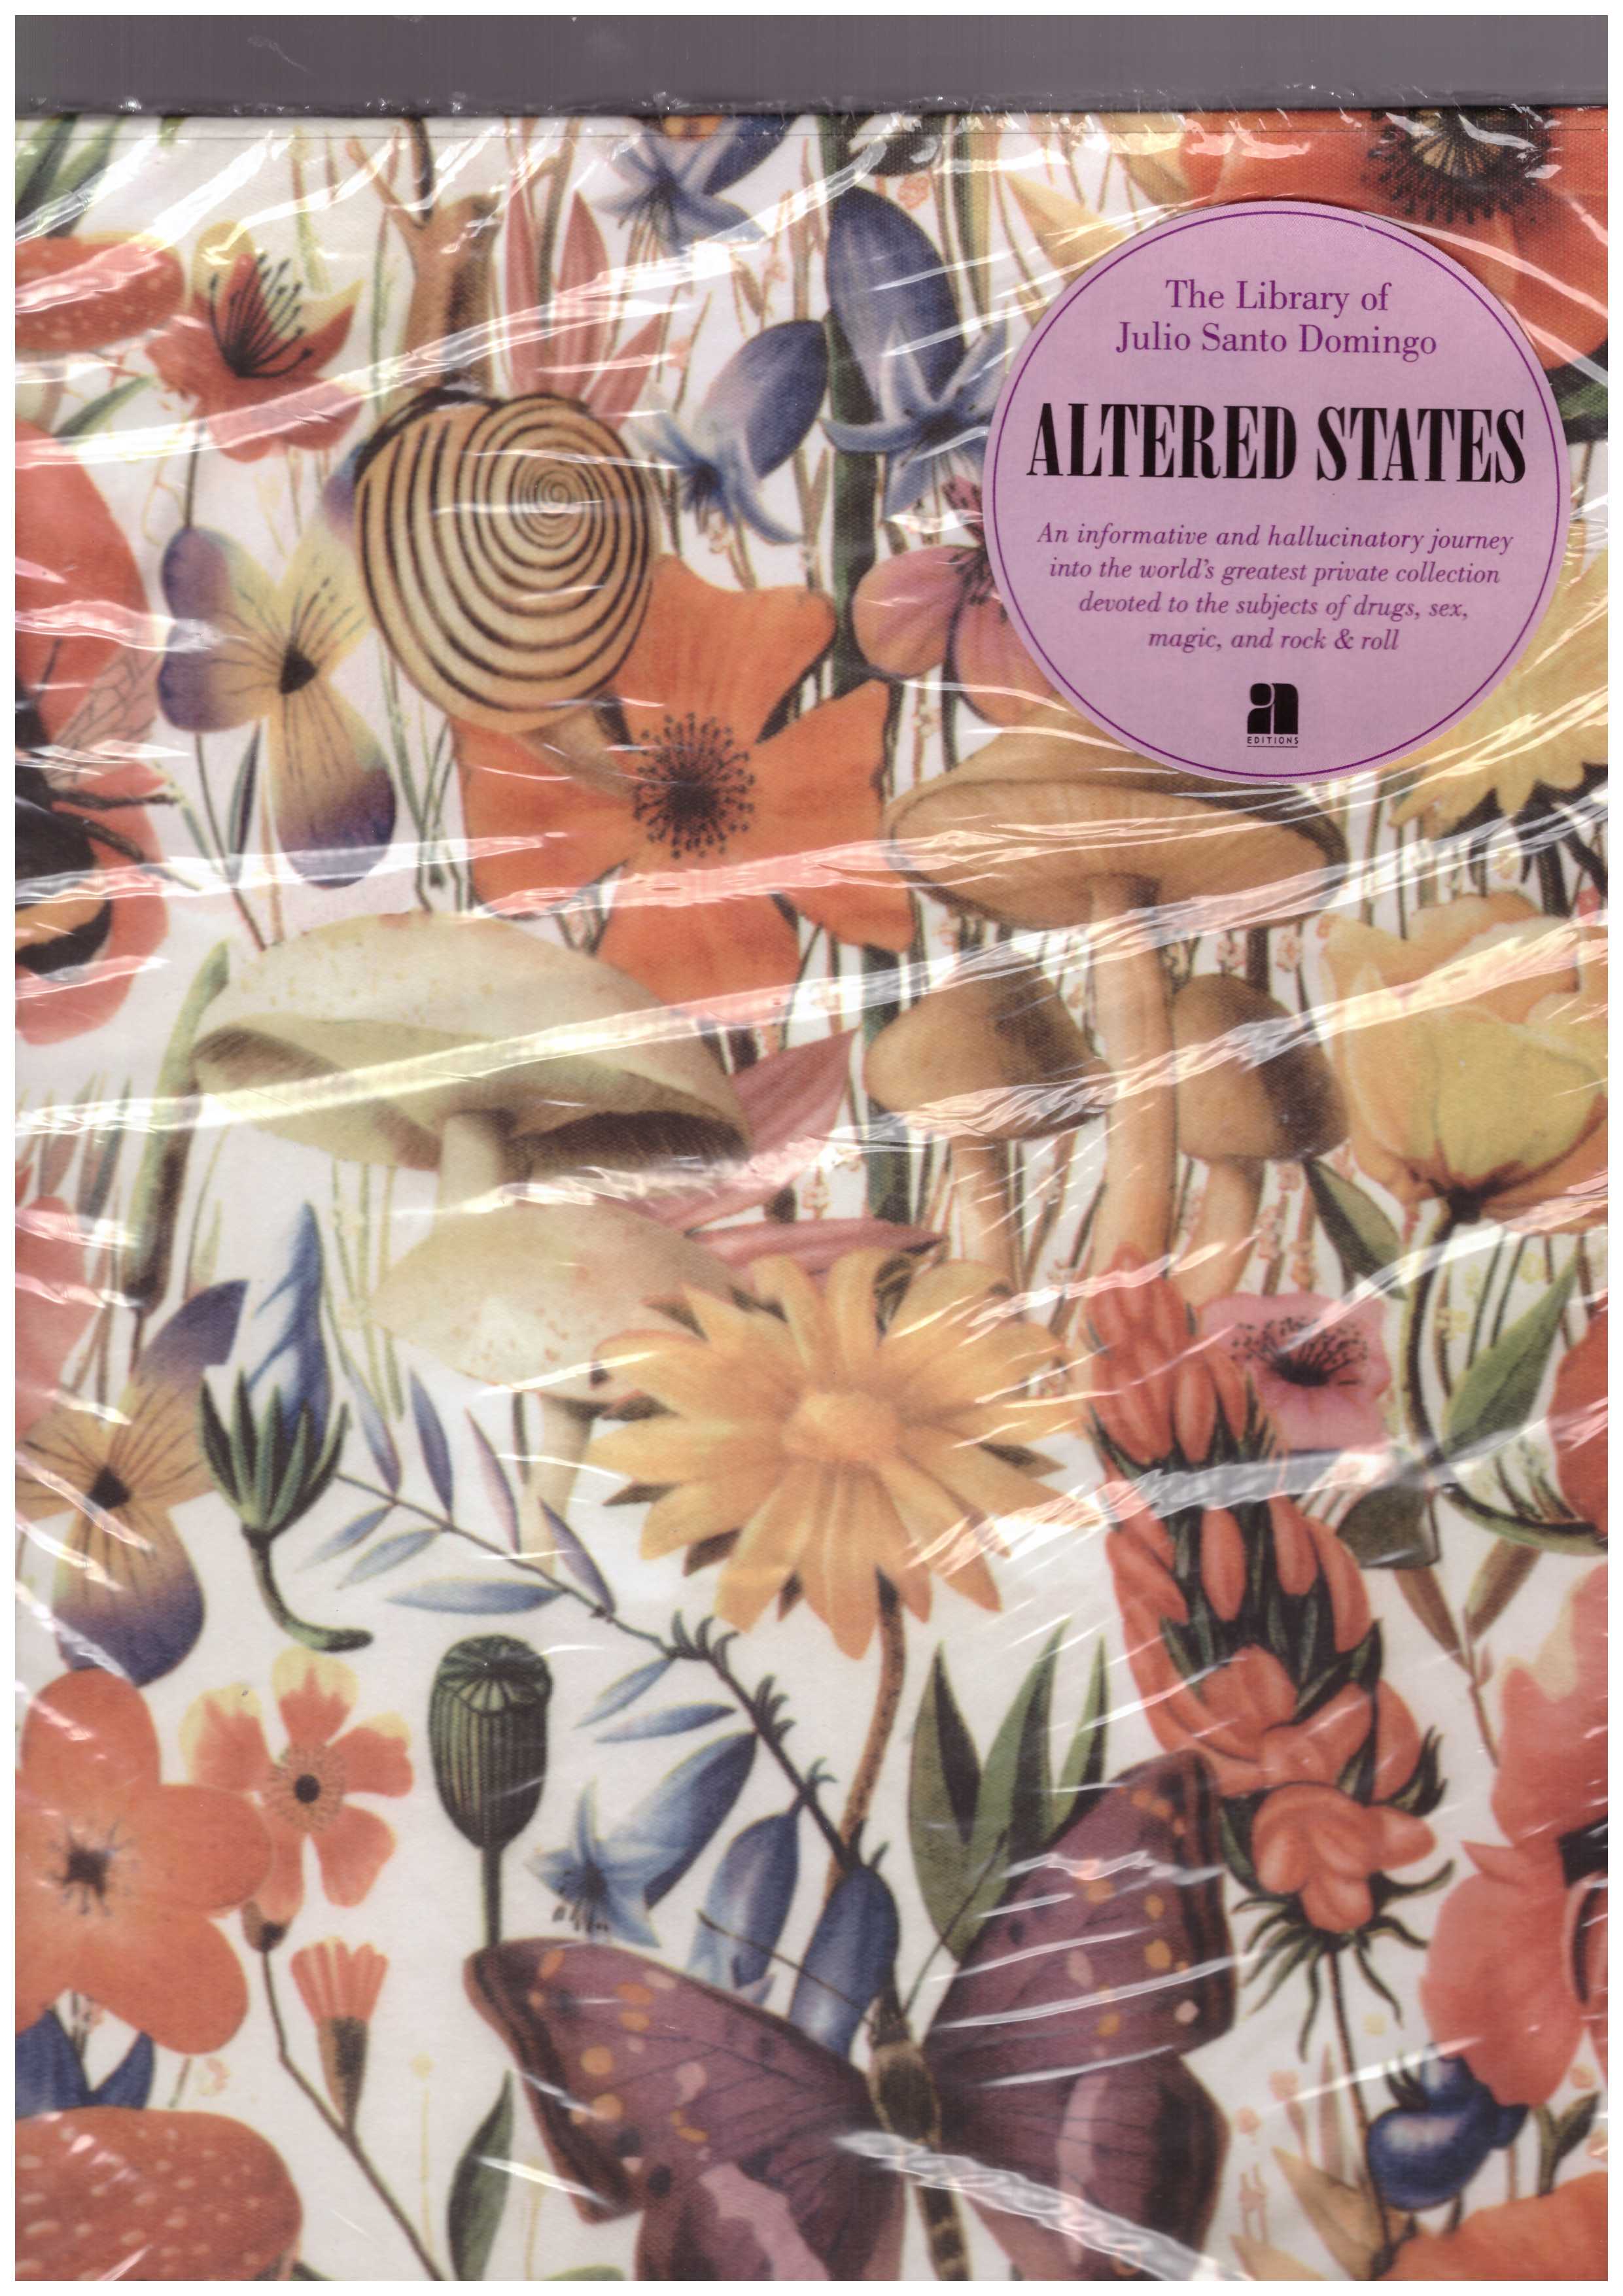 WATTS, Peter - Altered States.  The Library of Julio Santo Domingo